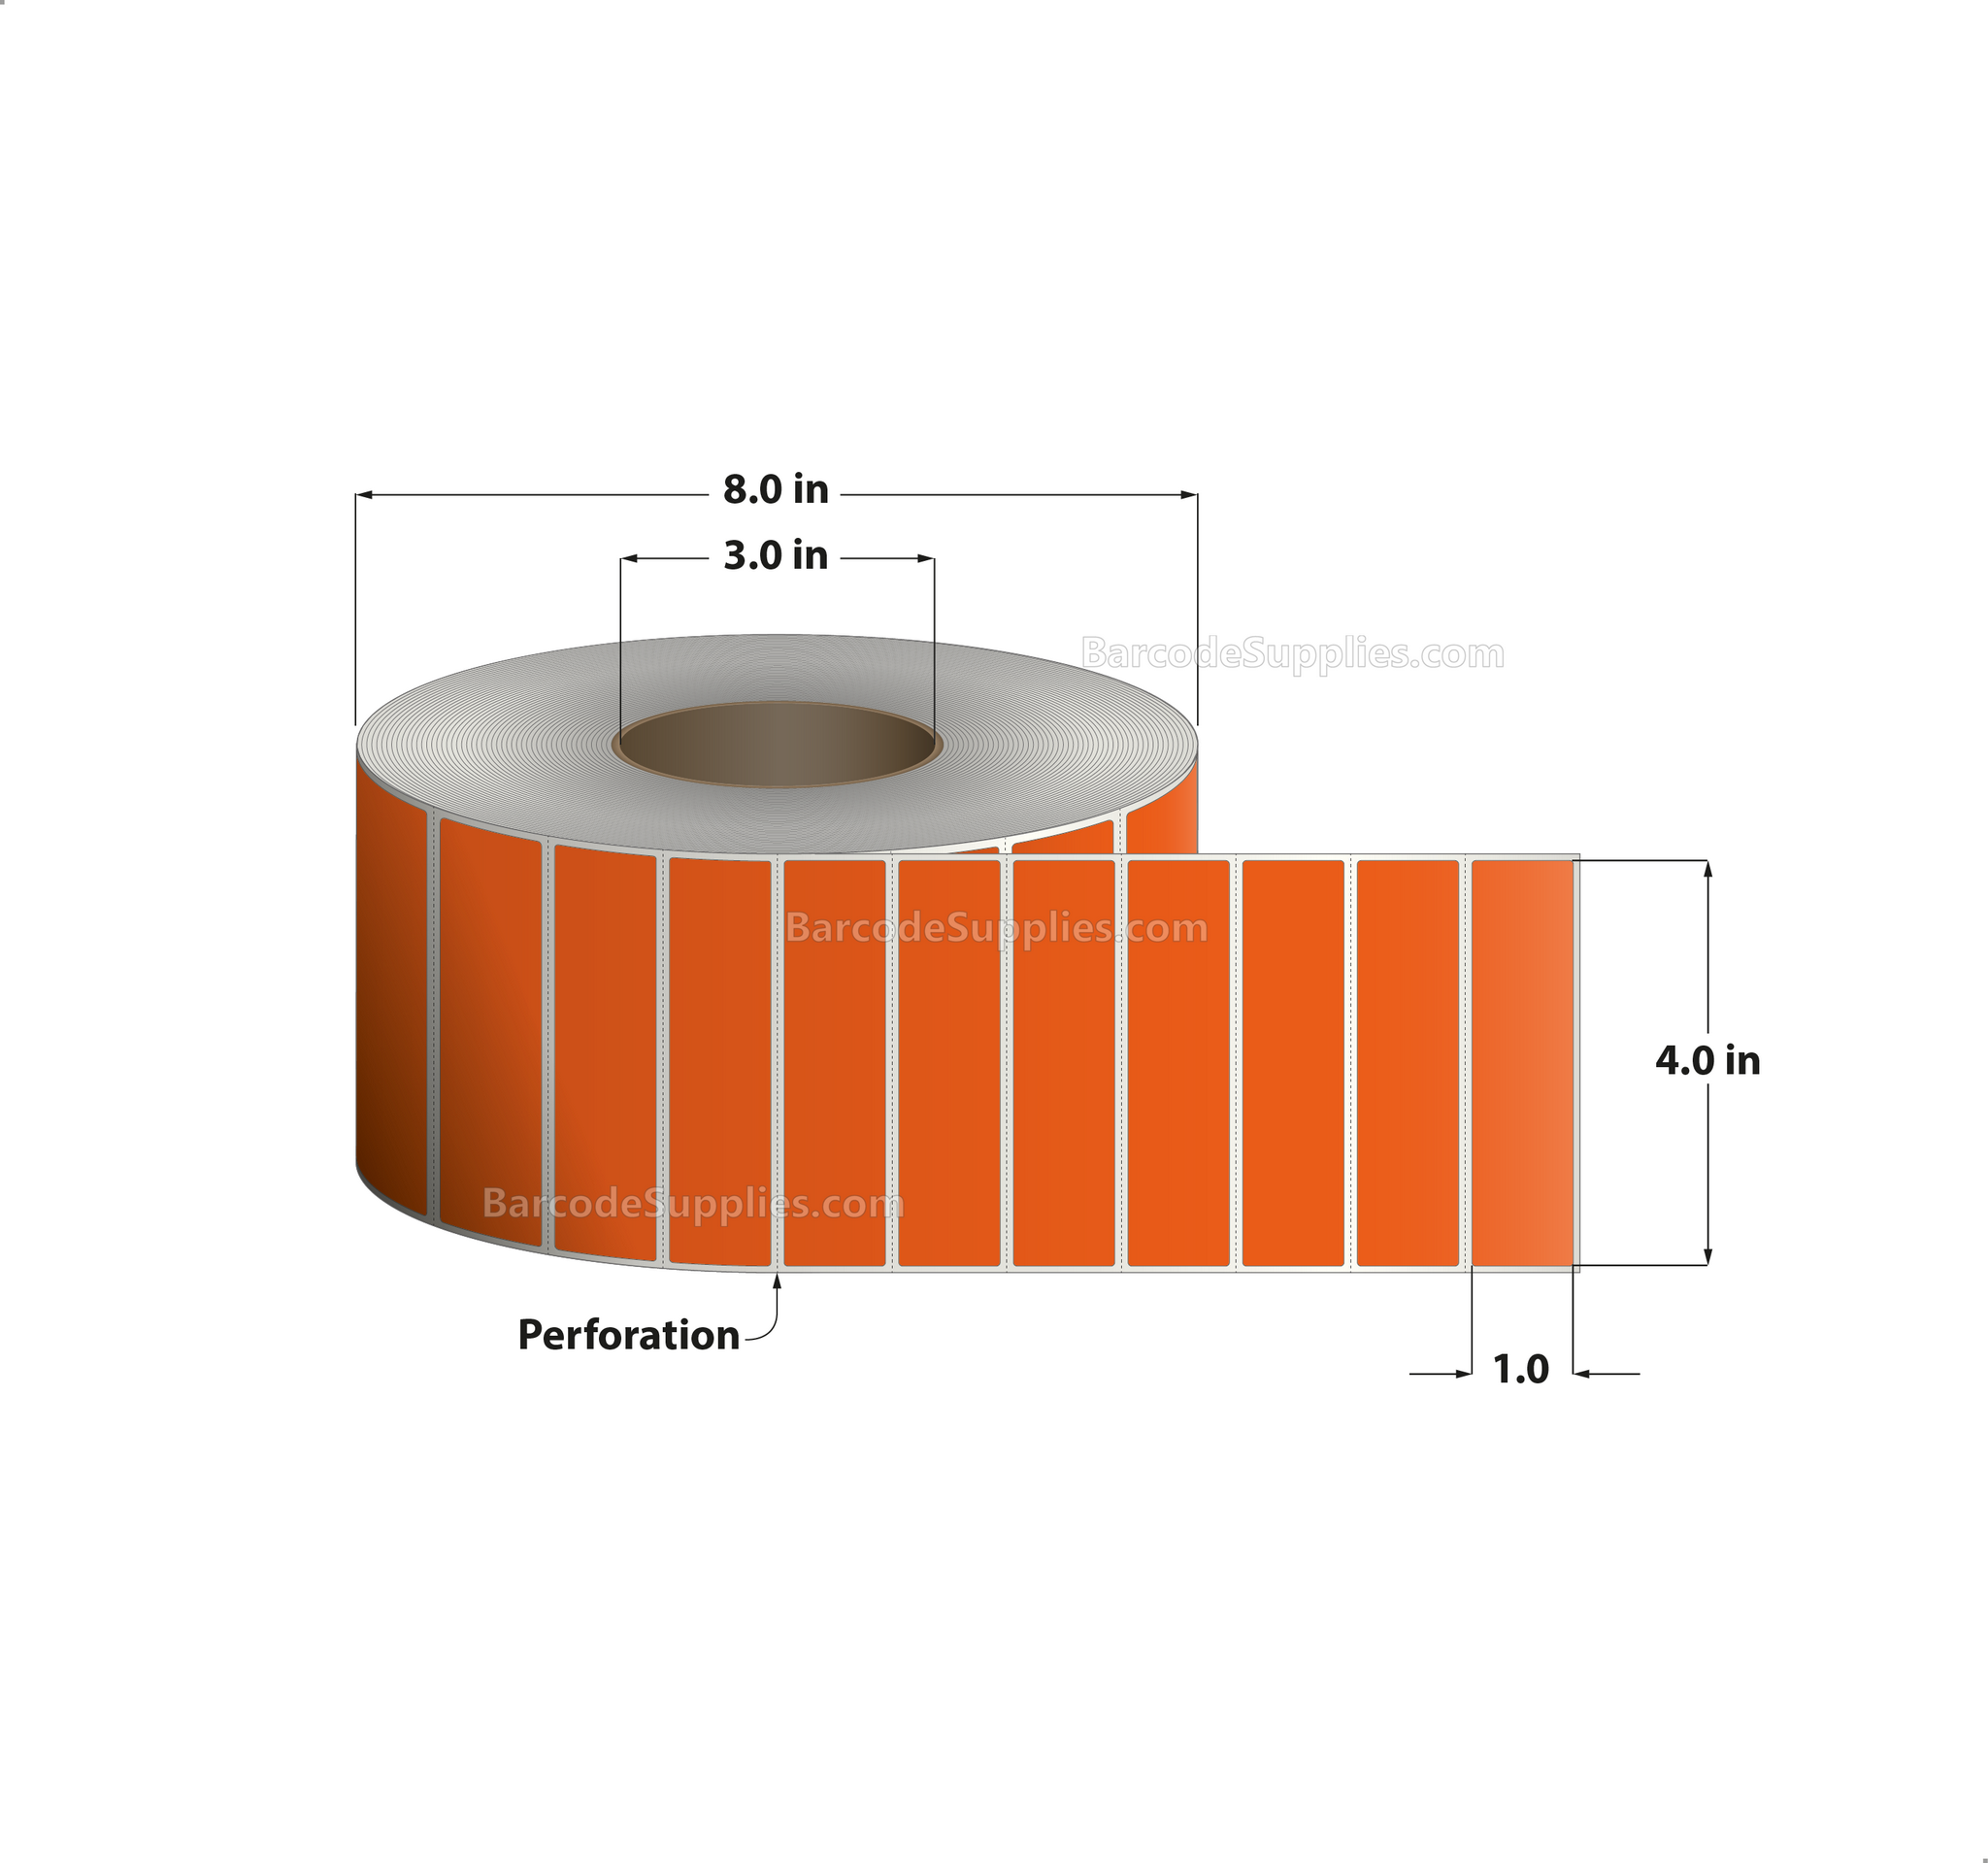 4 x 1 Thermal Transfer 1495 Orange Labels With Permanent Adhesive - Perforated - 5500 Labels Per Roll - Carton Of 4 Rolls - 22000 Labels Total - MPN: RFC-4-1-5500-OR